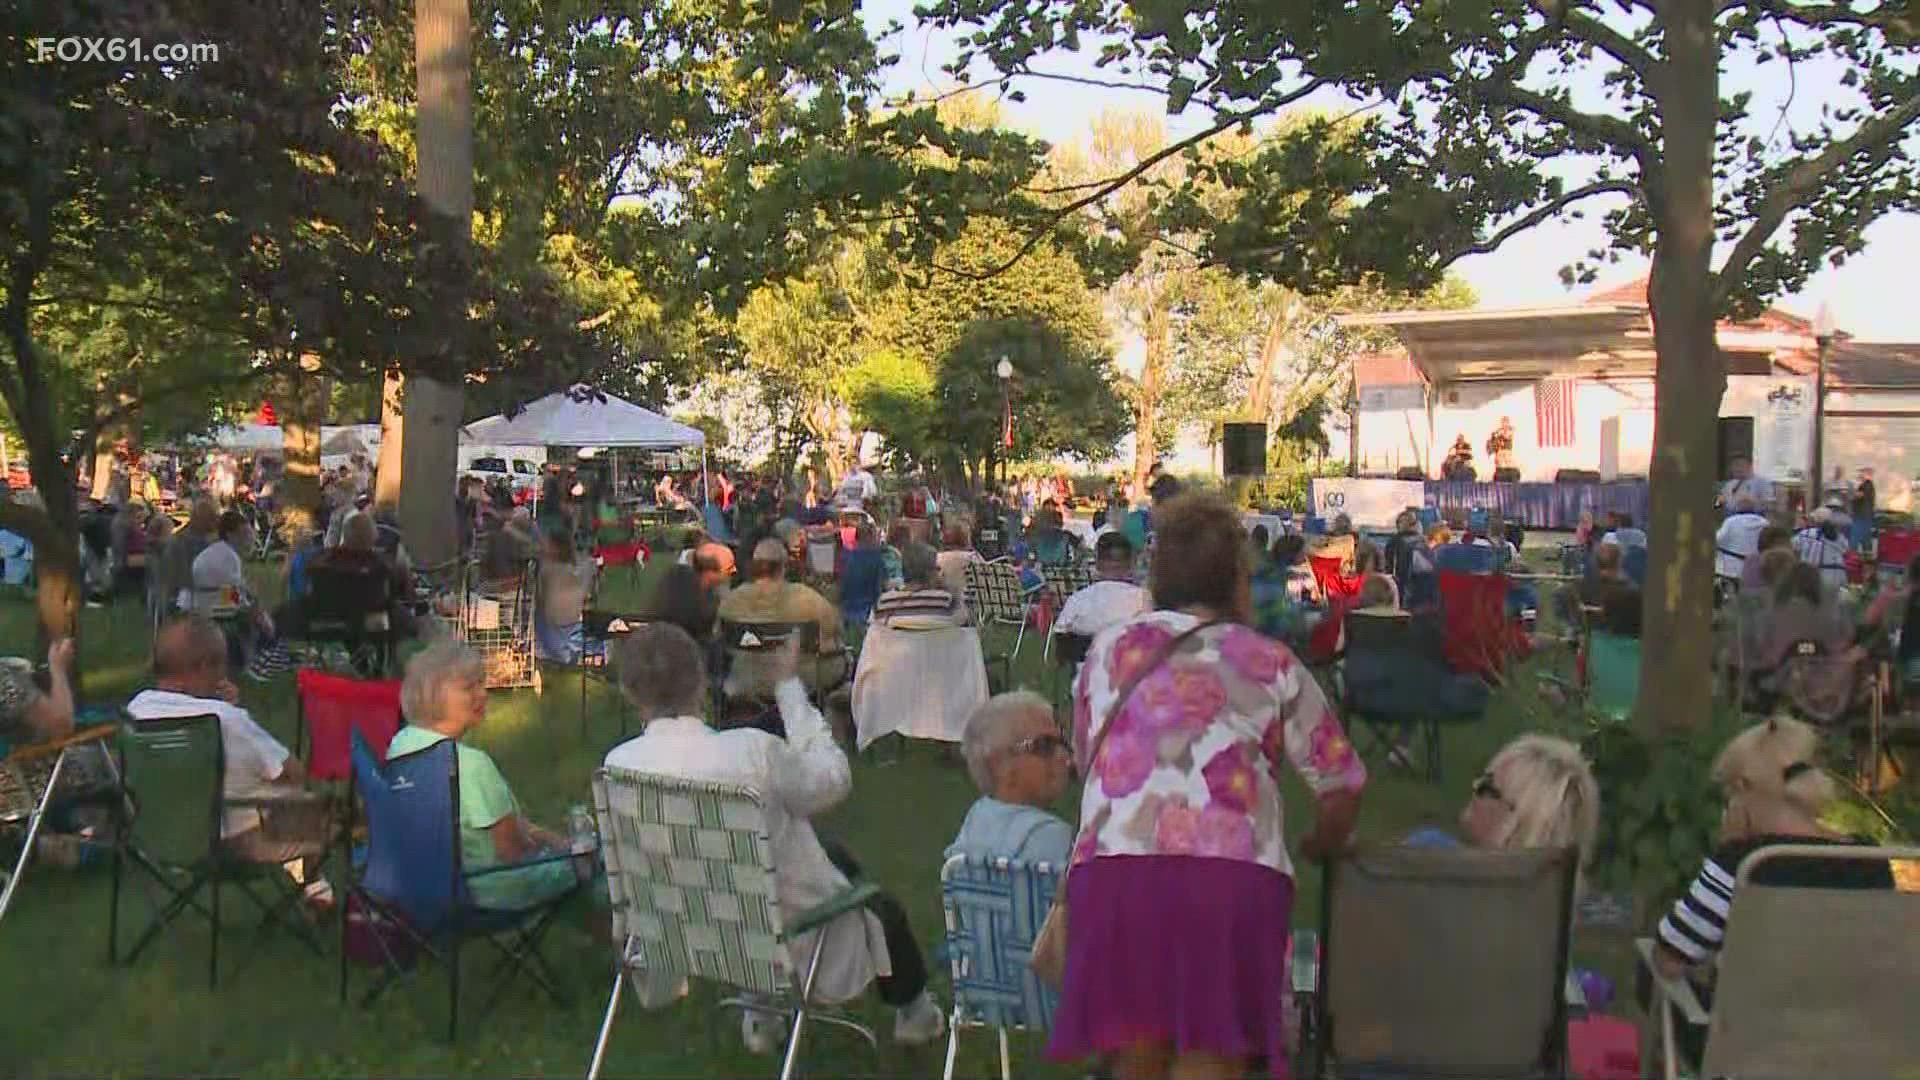 West haven mayor nancy Rossi says the festival was scaled back this year due to covid-19.